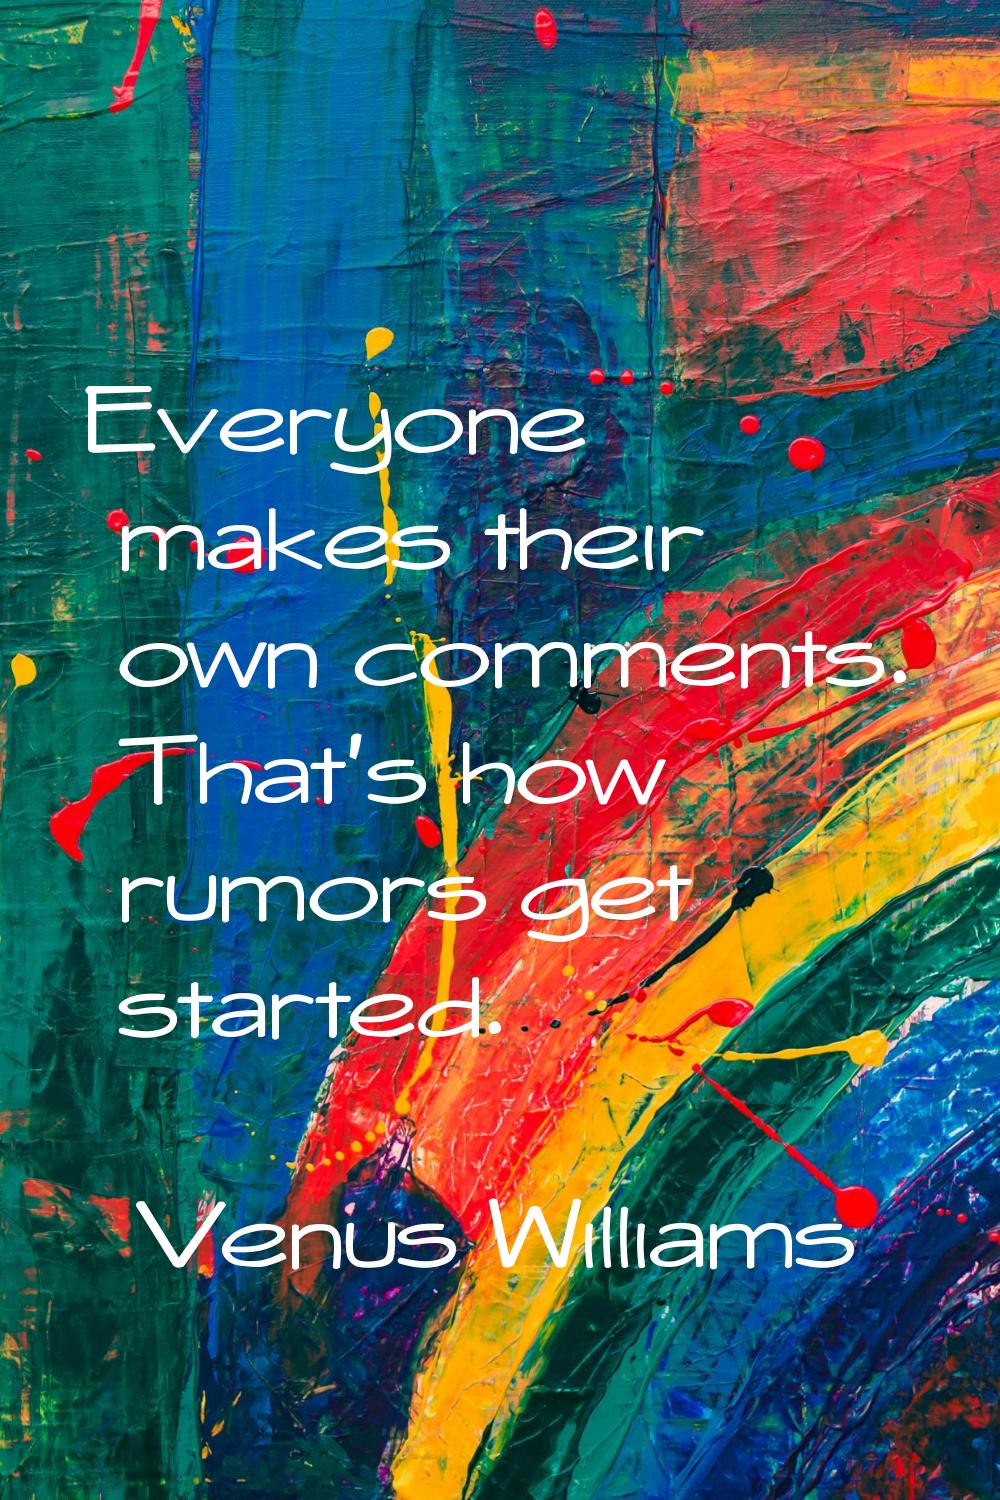 Everyone makes their own comments. That's how rumors get started.